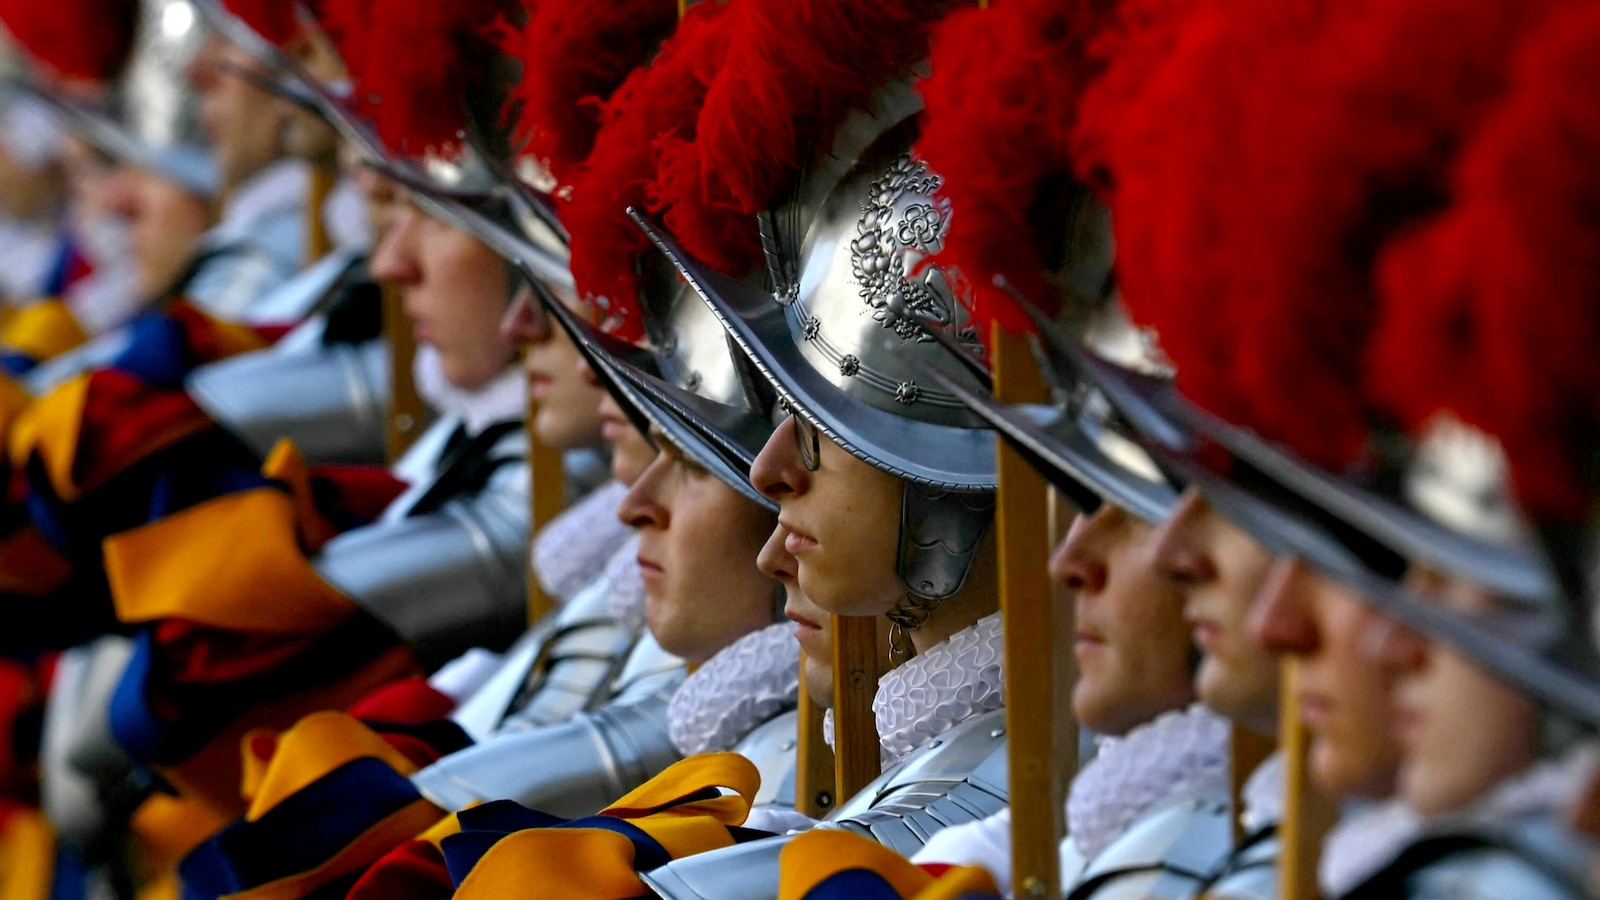 34 recruits join Vatican’s Swiss Guard, swearing allegiance to Pope Francis [Video]